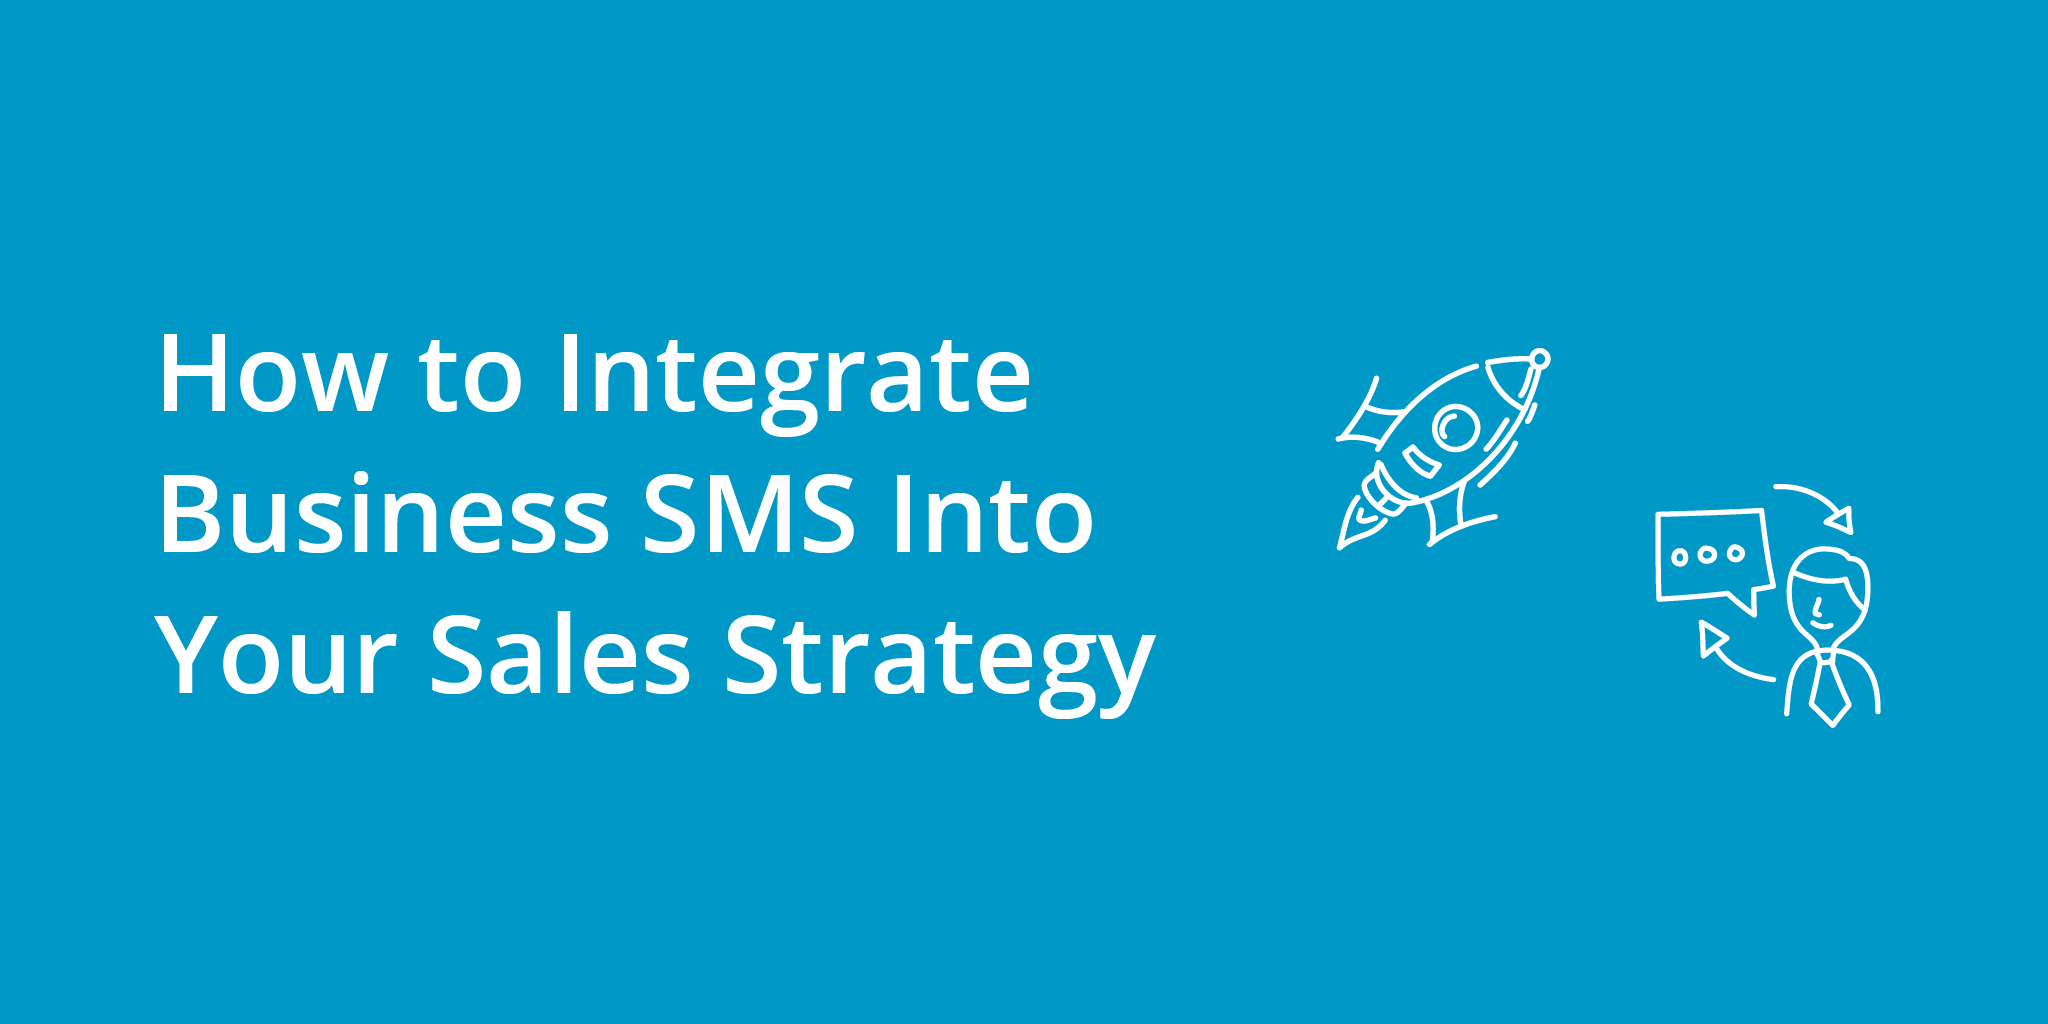 How to Integrate Business SMS into Your Sales Strategy | Telephones for business